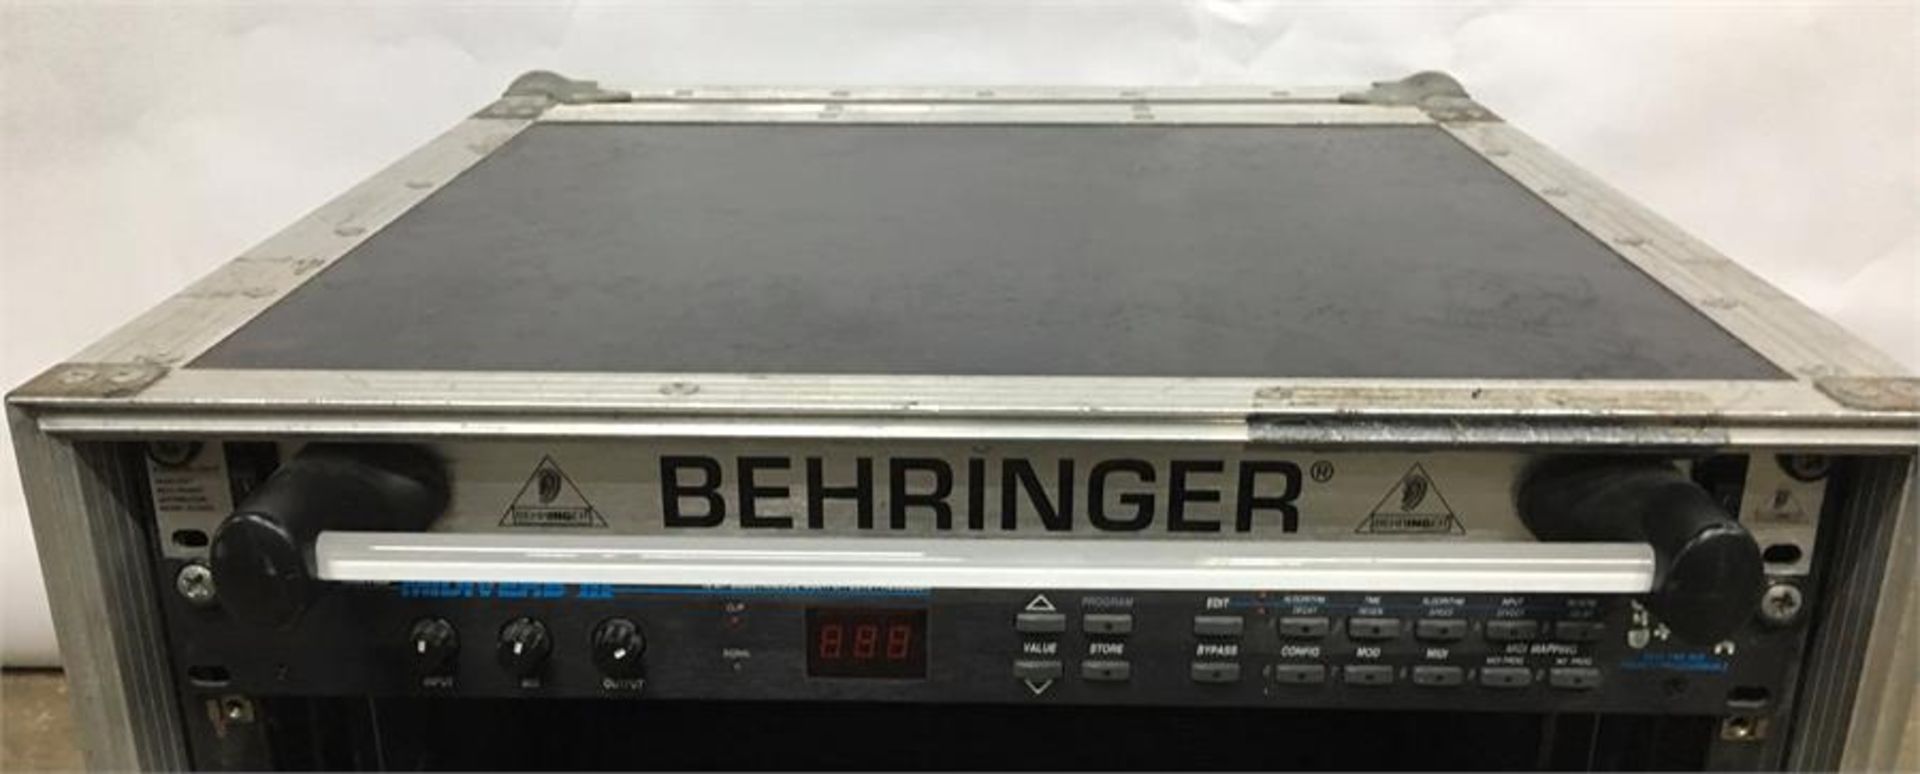 Behringer Racklight with Output Distribution and Alesis Midiverb 3 multi effects processor in case. - Image 2 of 2